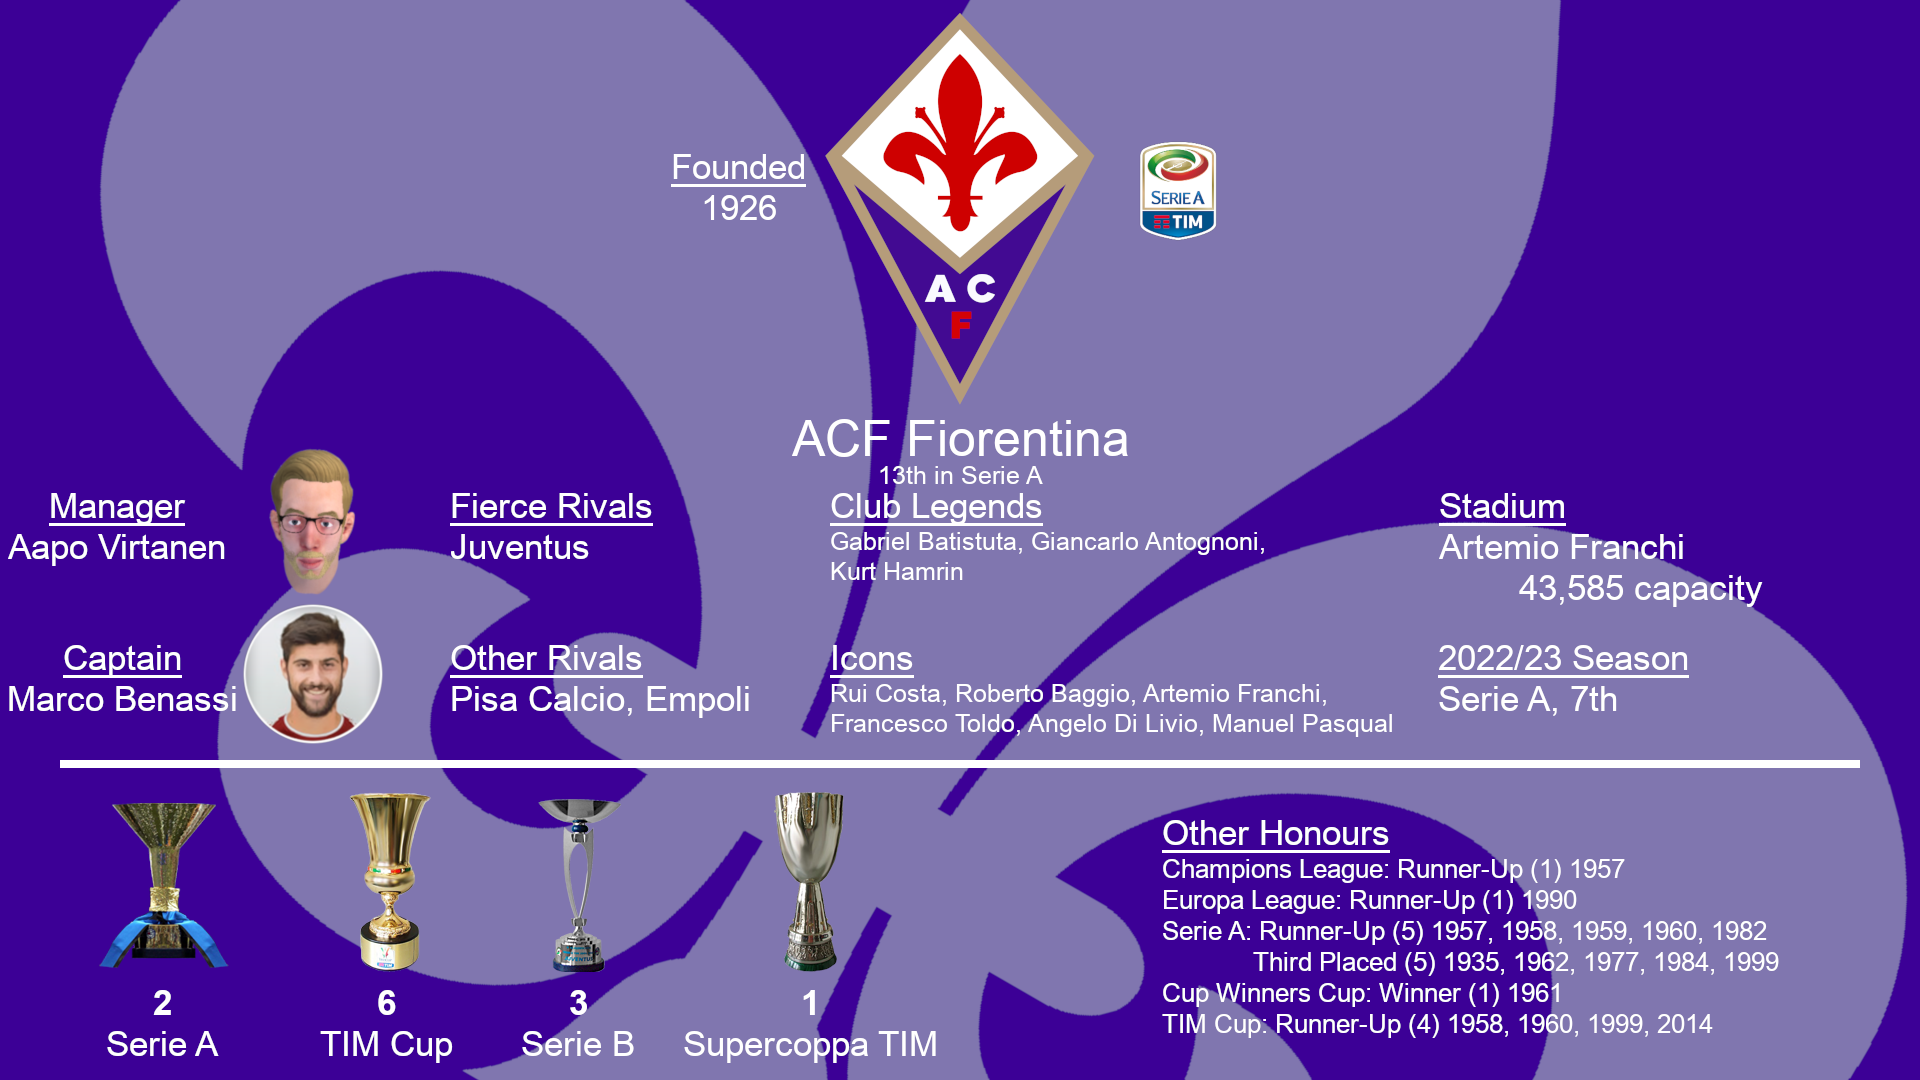 ACF Fiorentina Launches Contest for Fans to Design 2022-23 Fourth